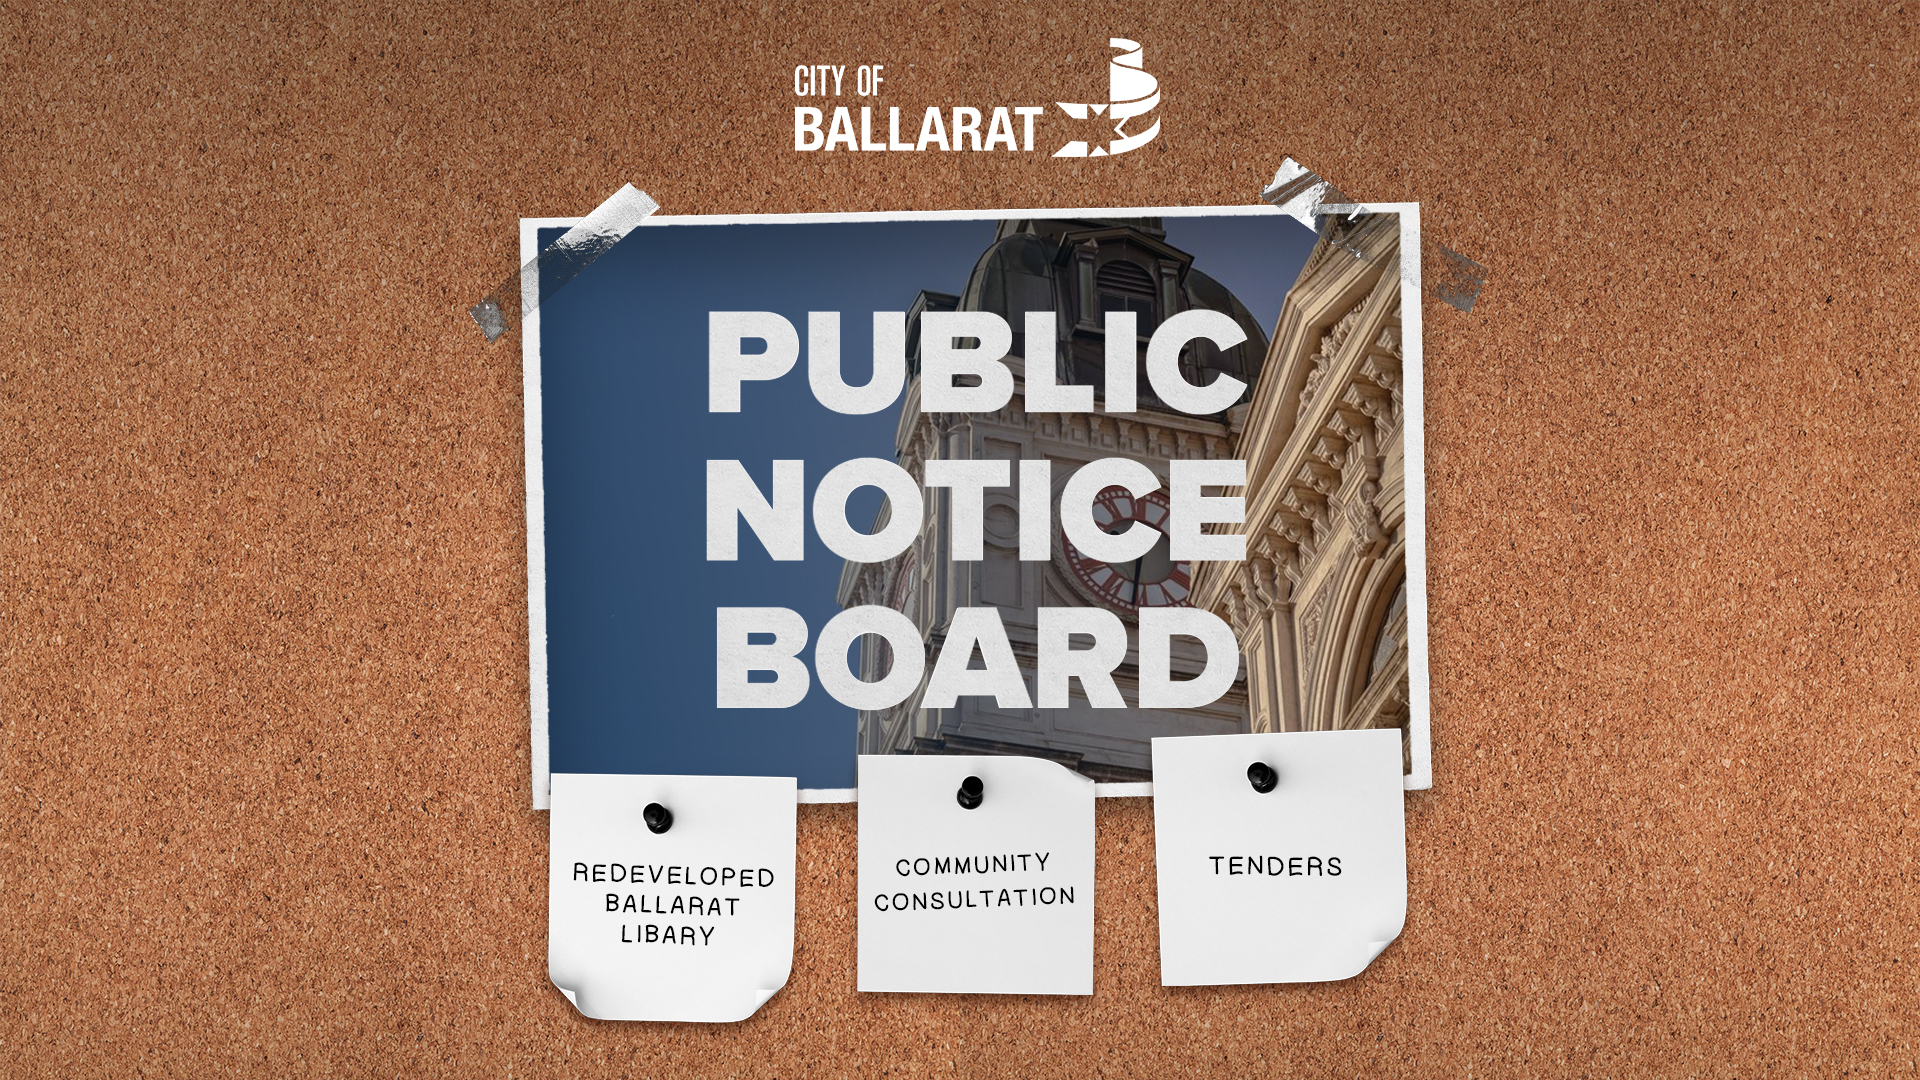 Notice board with Public Notice Board text over an image of Ballarat Town Hall. Three notes underneath with text saying Redeveloped Ballarat Library, Community Consultation, Tenders